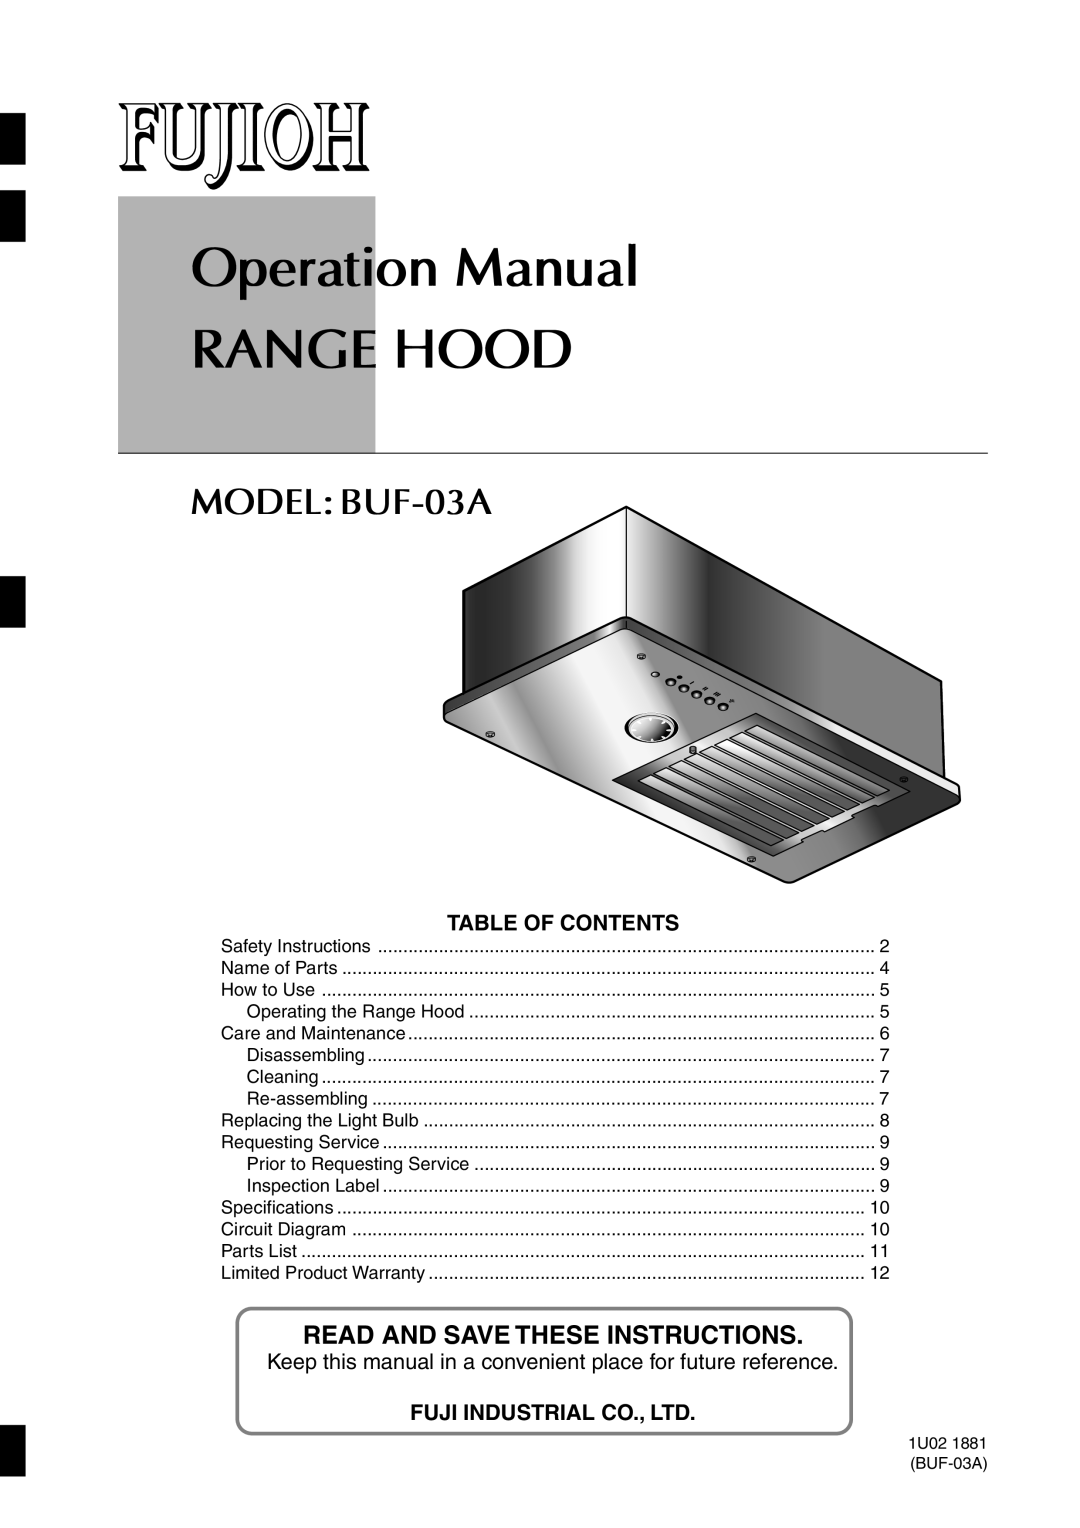 Fujioh operation manual MODEL BUF-03A, Table Of Contents, Read And Save These Instructions 